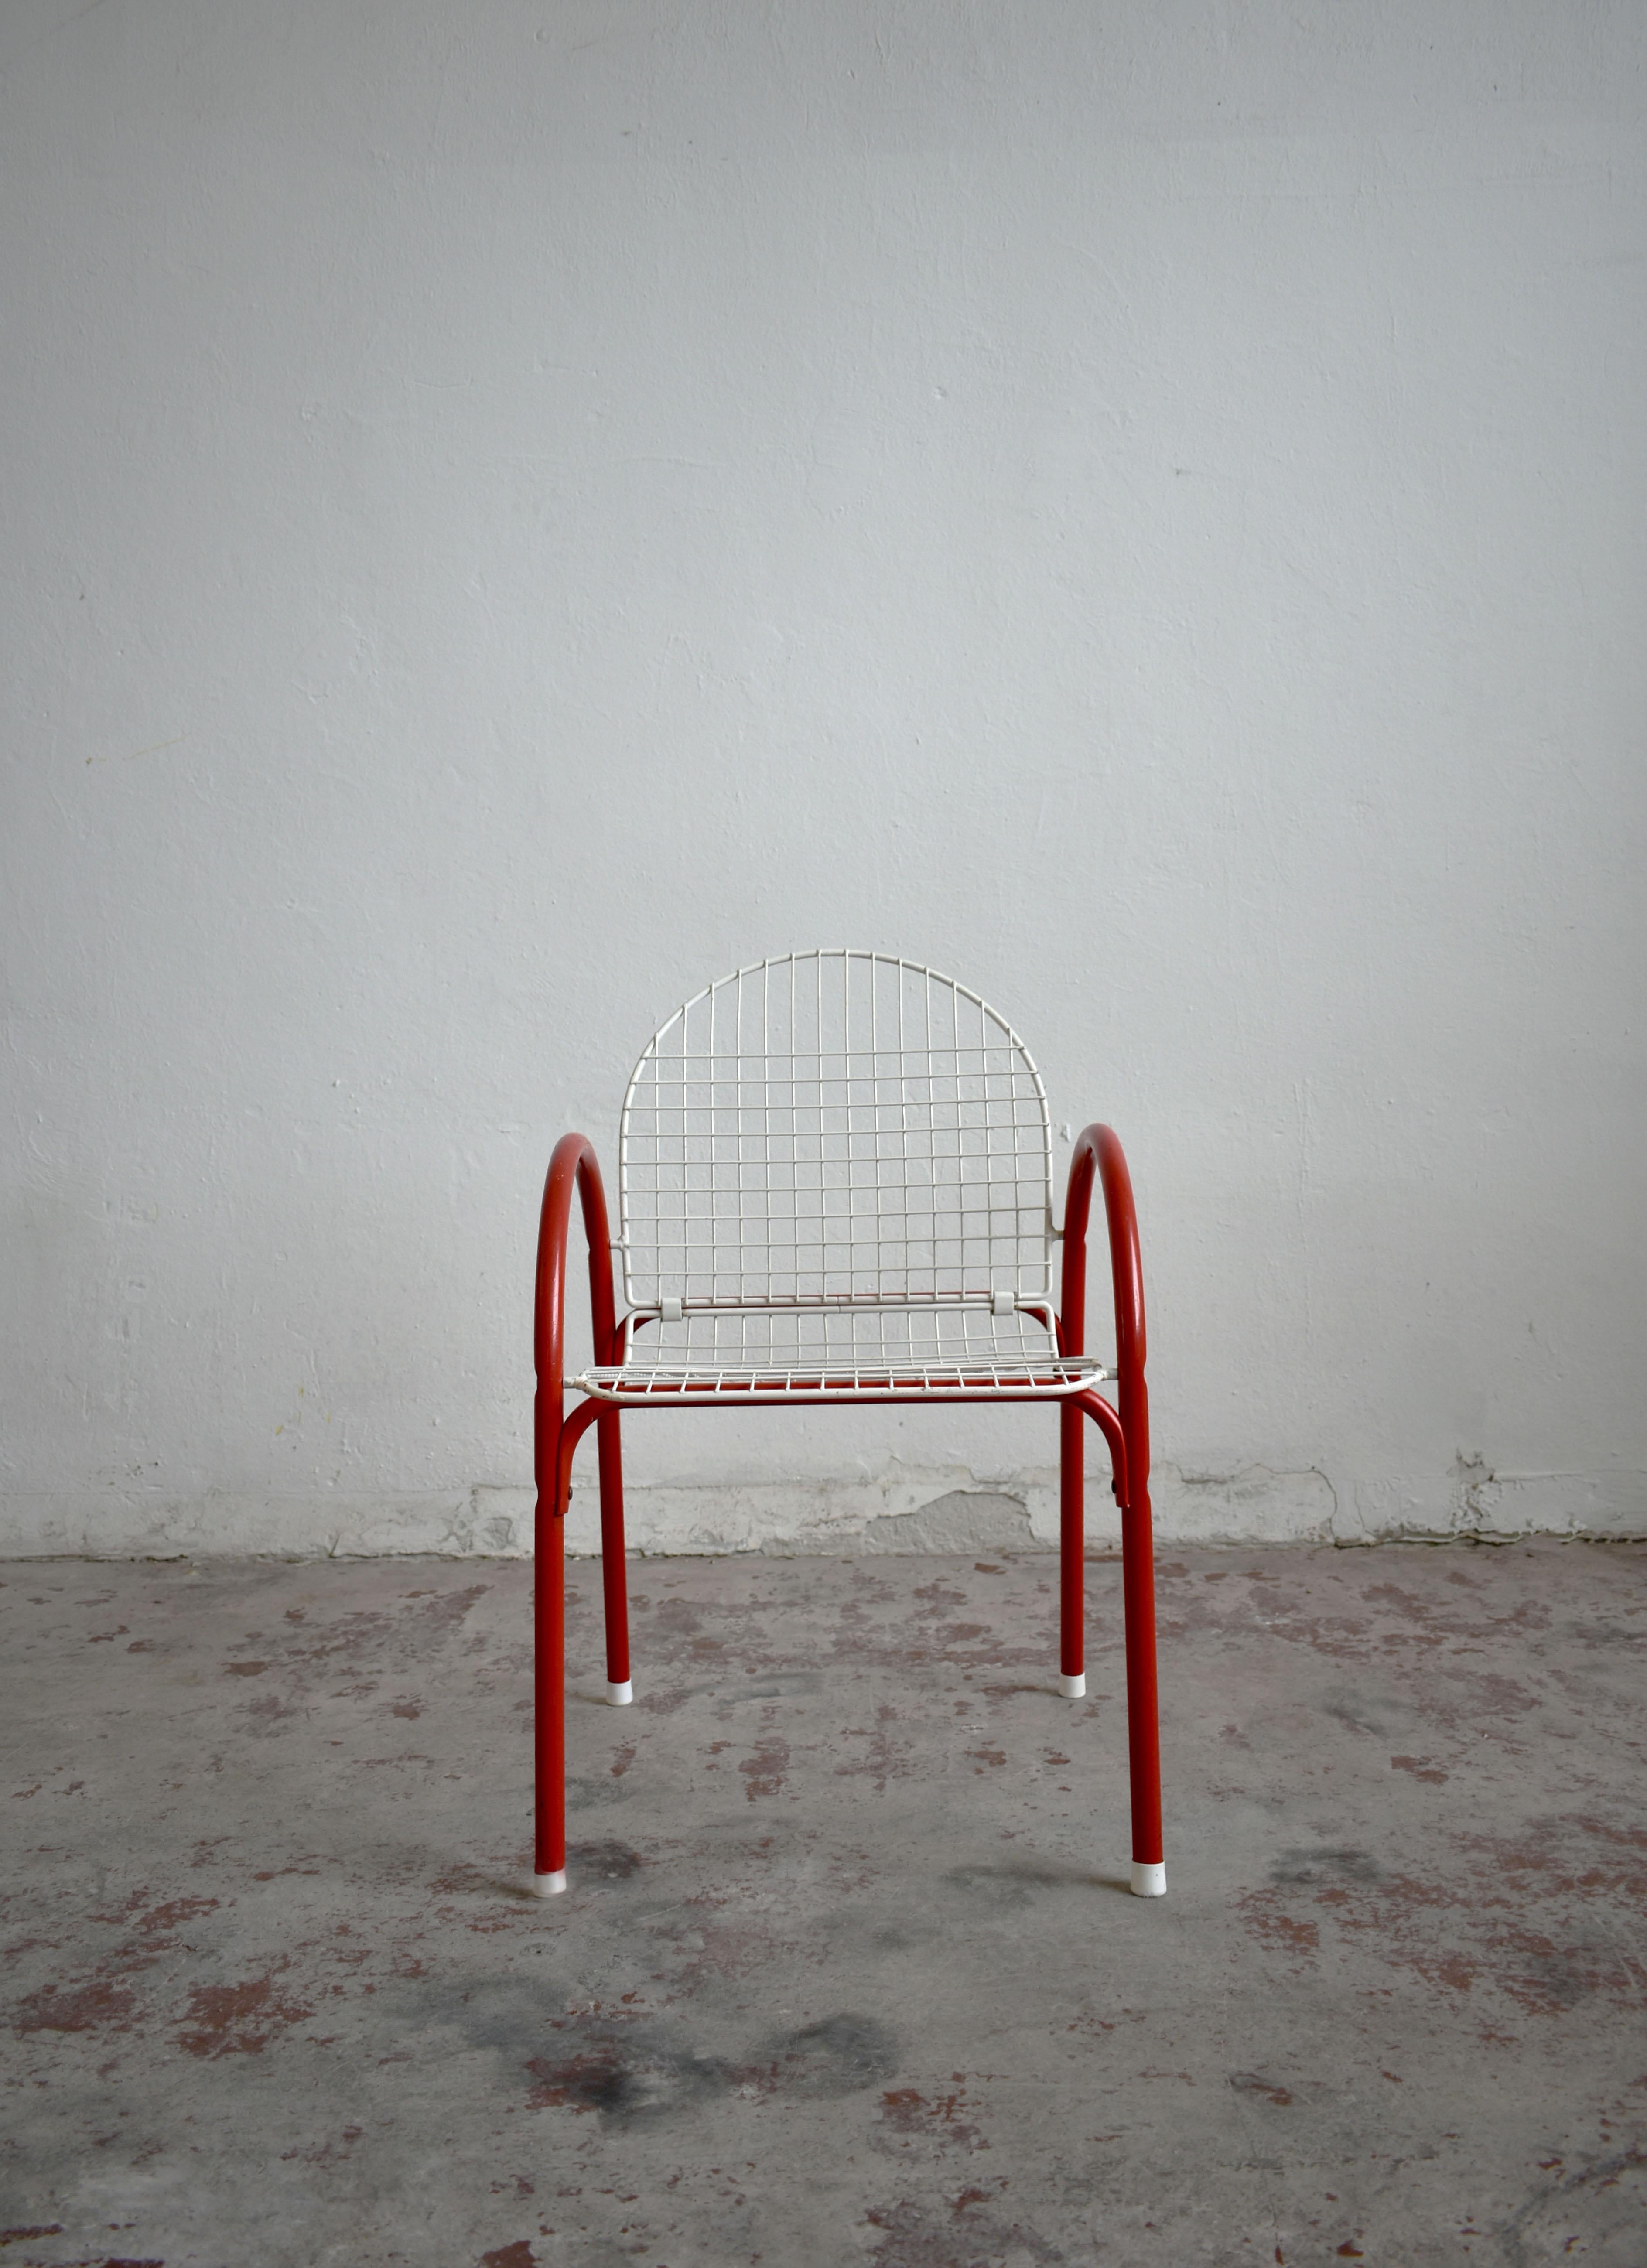 Vintage garden chair, modernist design

Produced in 1970s-1980s

Tubular metal frame lacquered in red color supports seat made of wire mesh powder-coated in white color

The chair is in very good original vintage condition, there are some